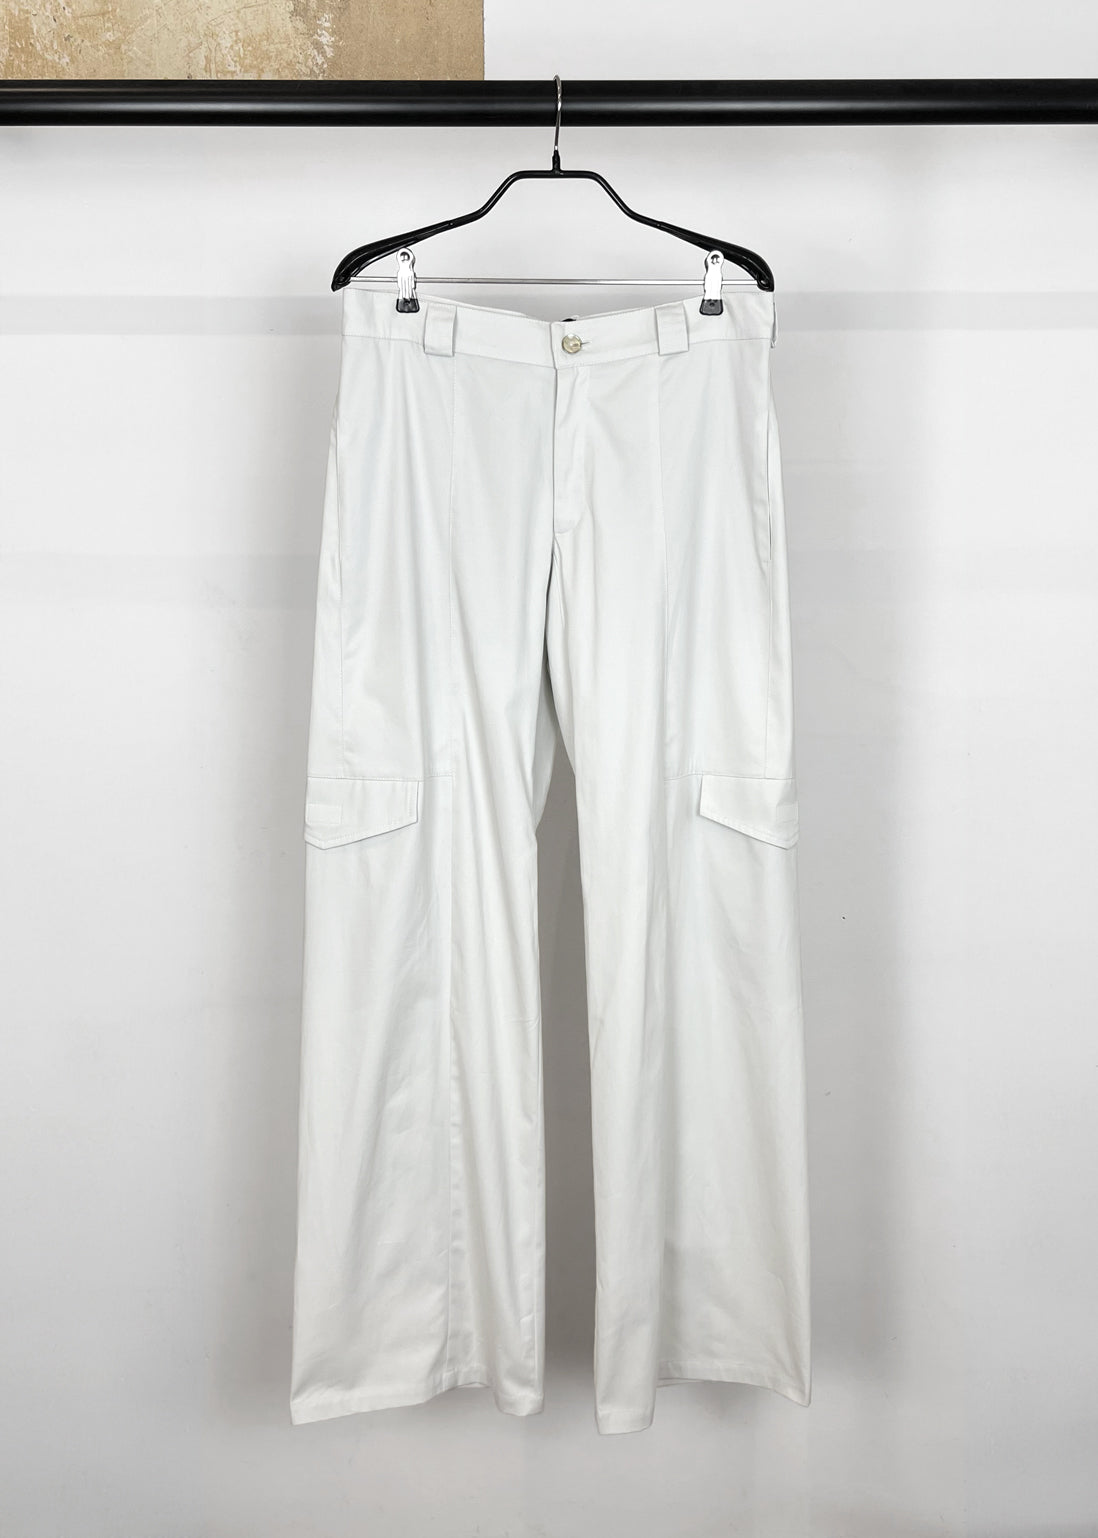 Cargo Pants with Pockets and Panels in Cream Cotton "Billie"